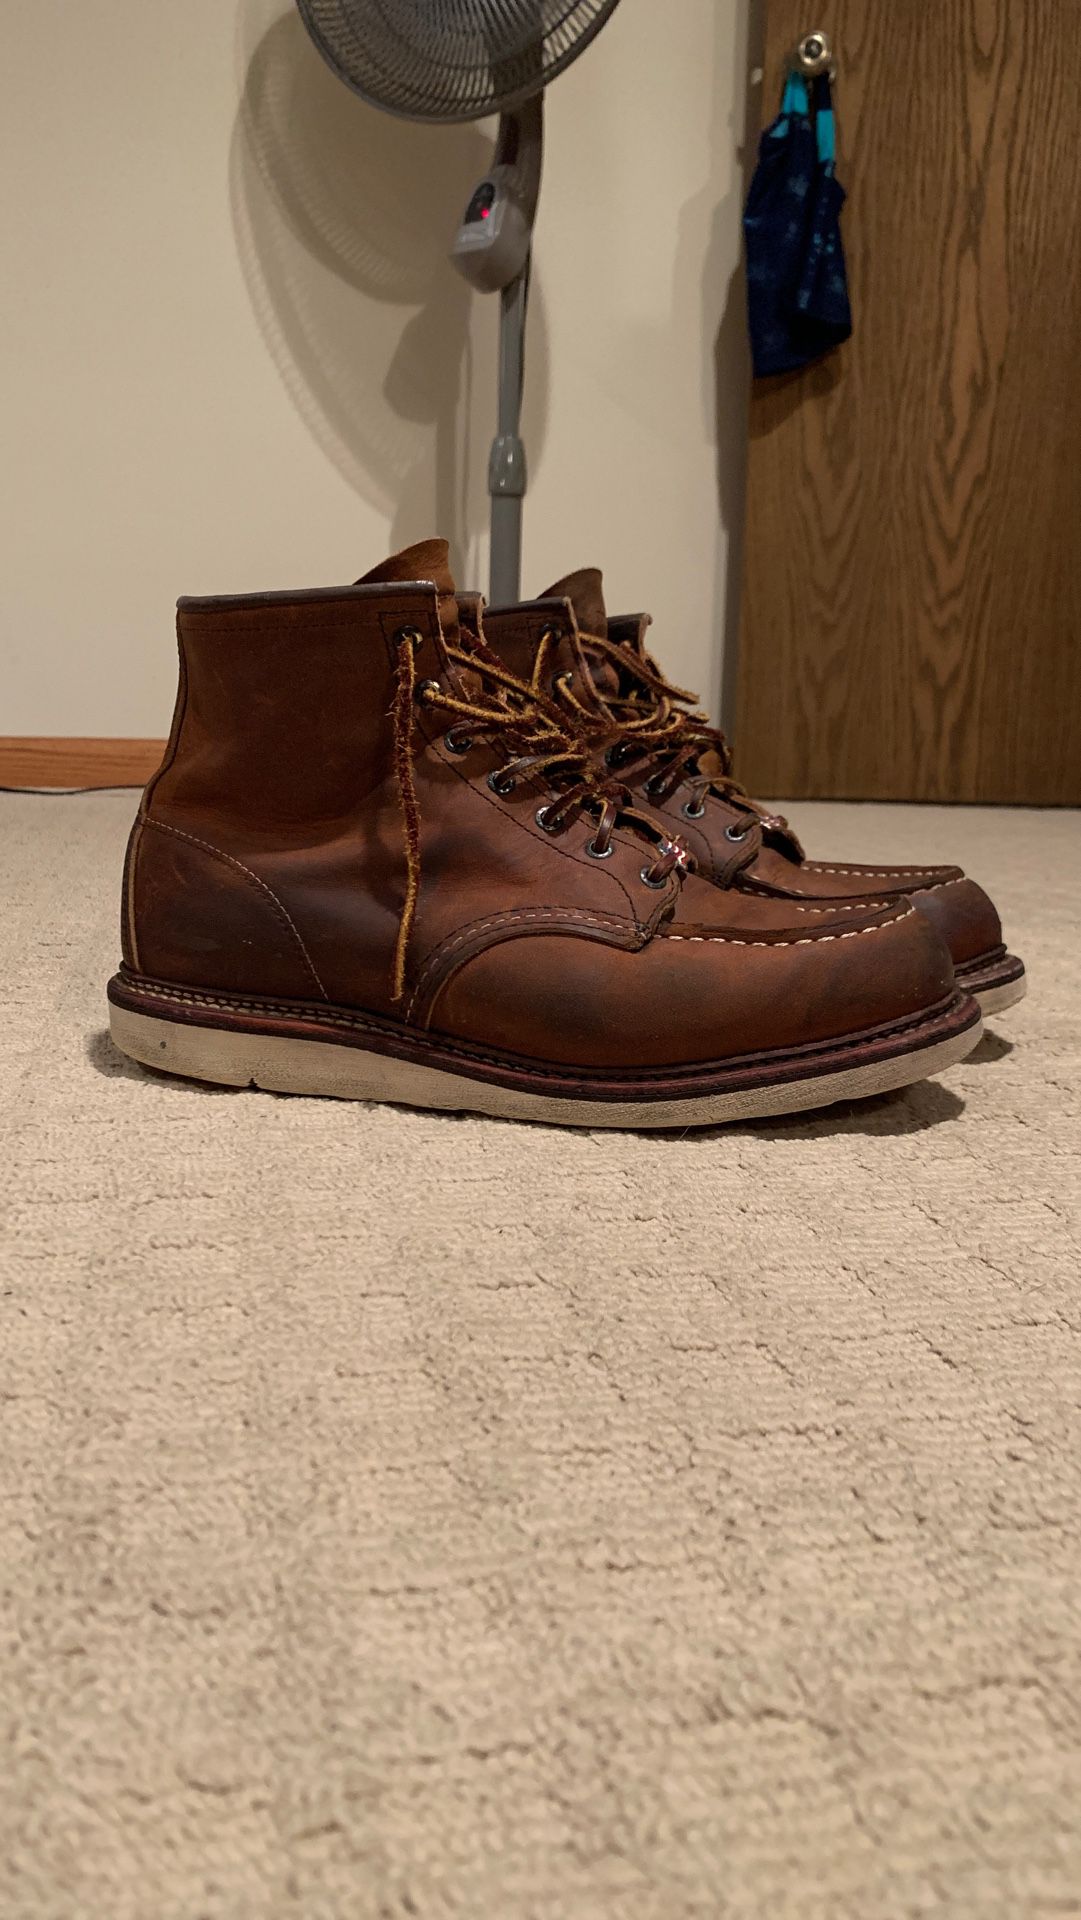 Red wing heritage moc toe